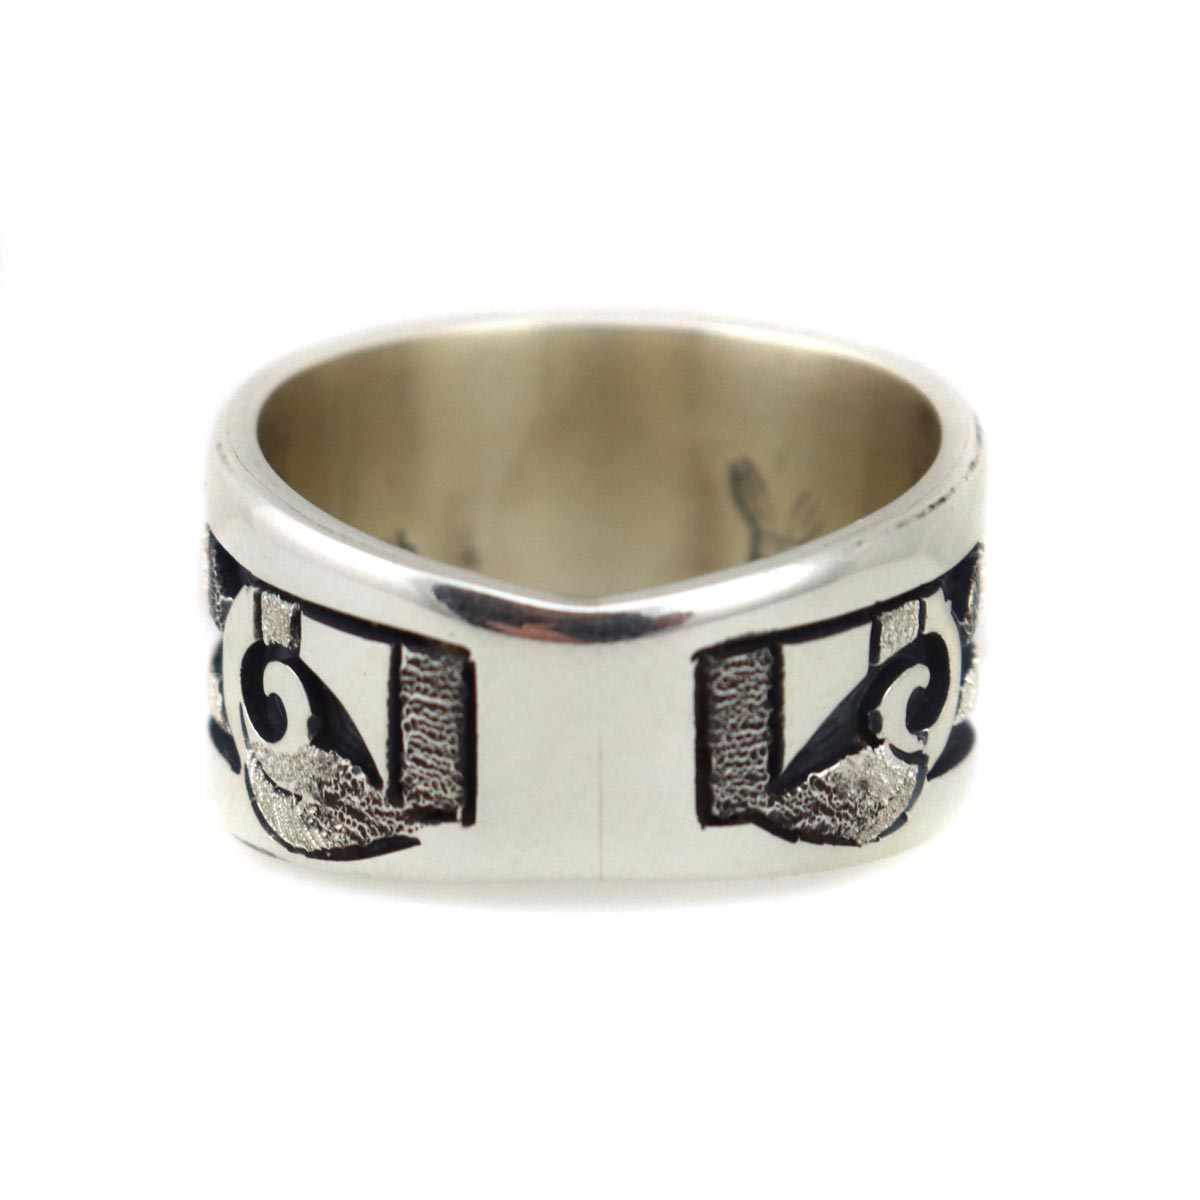 Ronald Wadsworth - Hopi Contemporary Sterling Silver Overlay Ring with Sunface Kachina Design, size 9 (J14773)  2